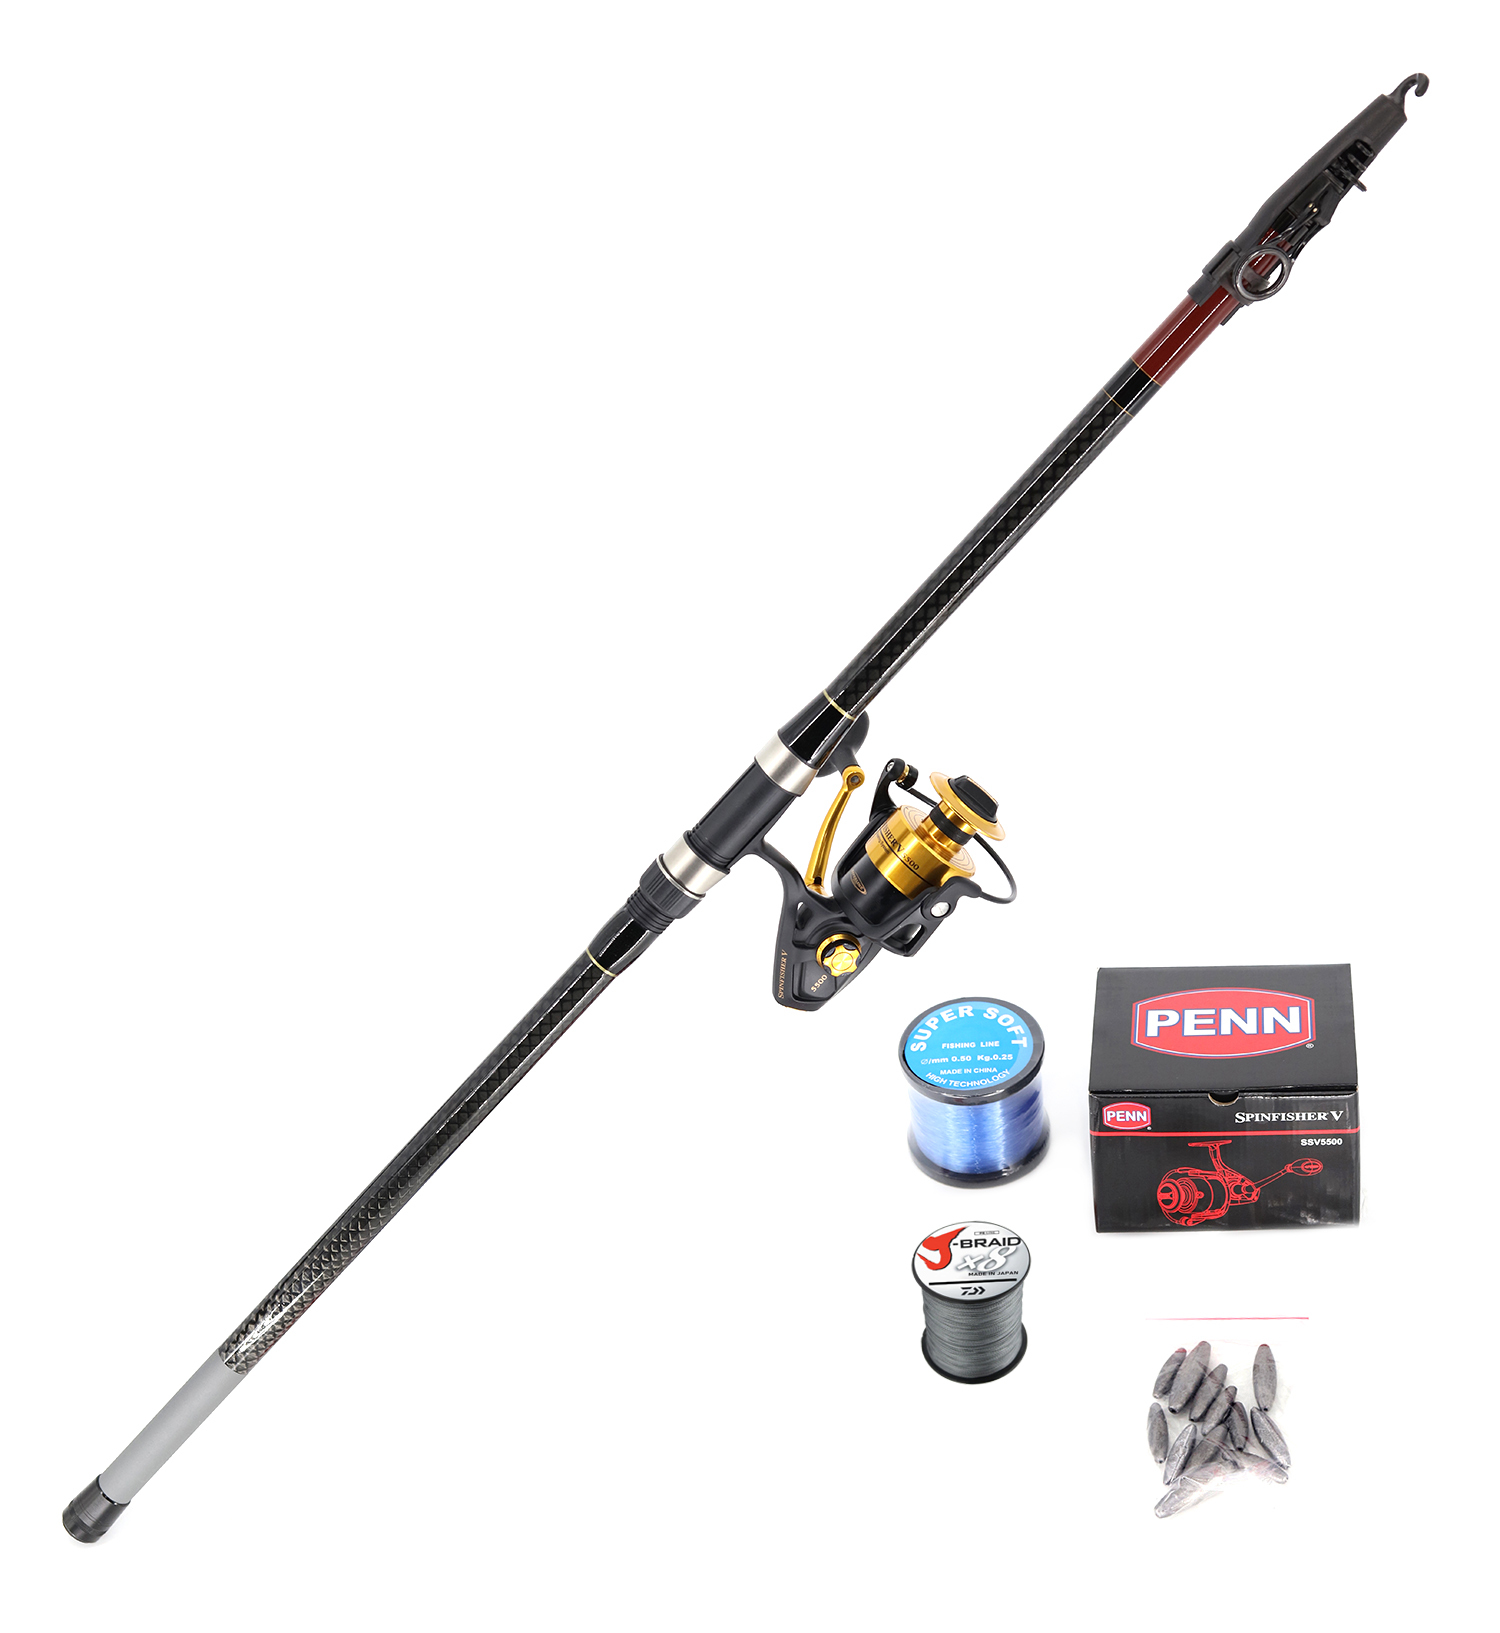 Shore Fishing (Pilot 4.2m and Penn V5500 including braid and mono line with rigs and sinkers) Combo